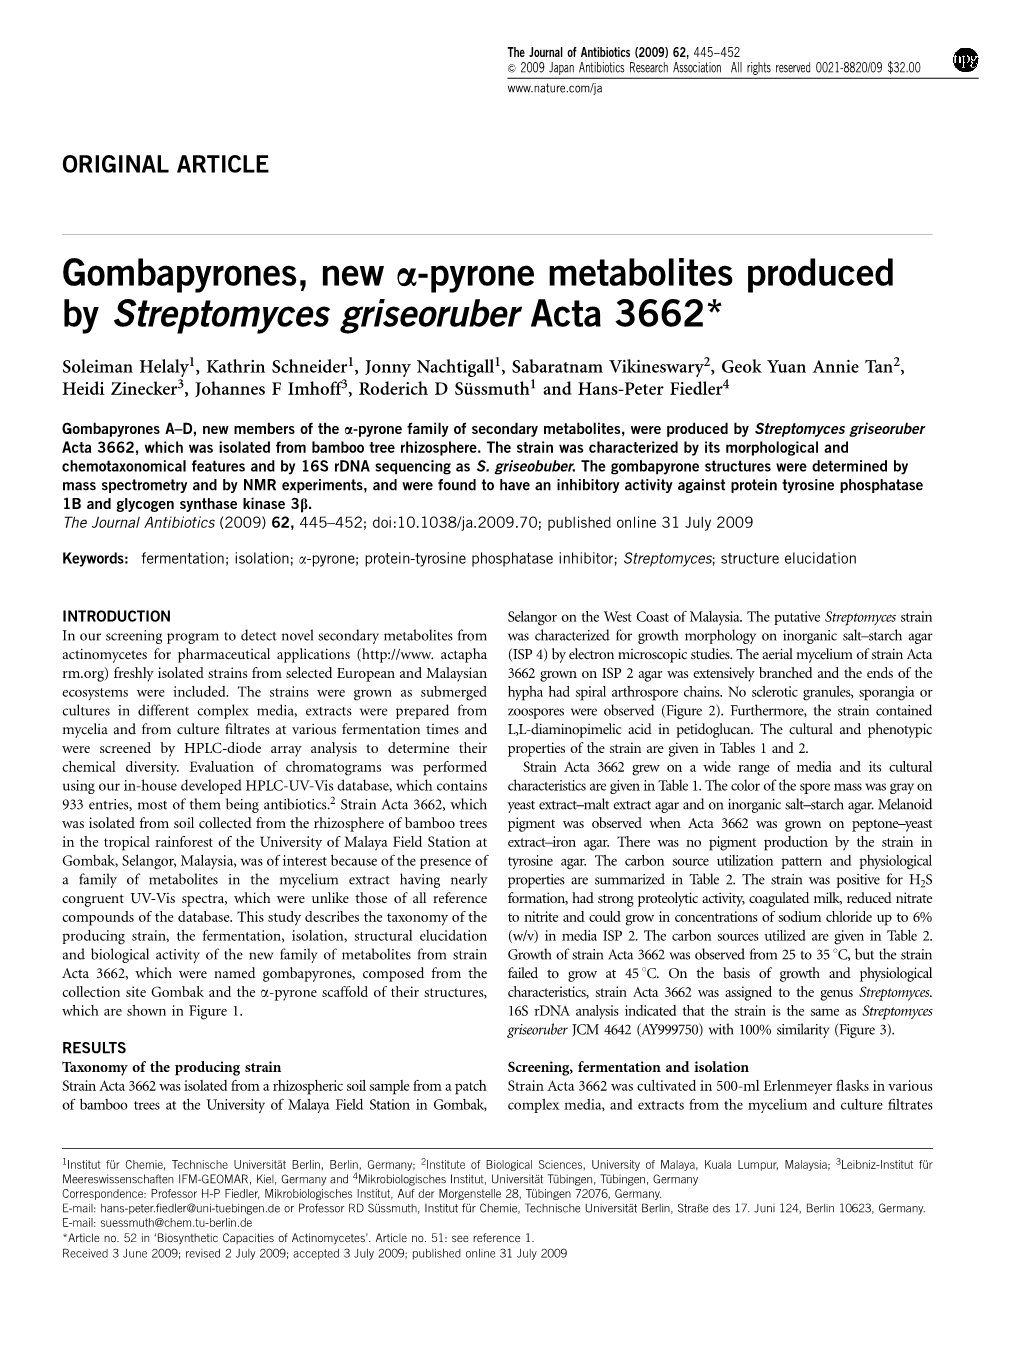 Pyrone Metabolites Produced by Streptomyces Griseoruber Acta 3662*